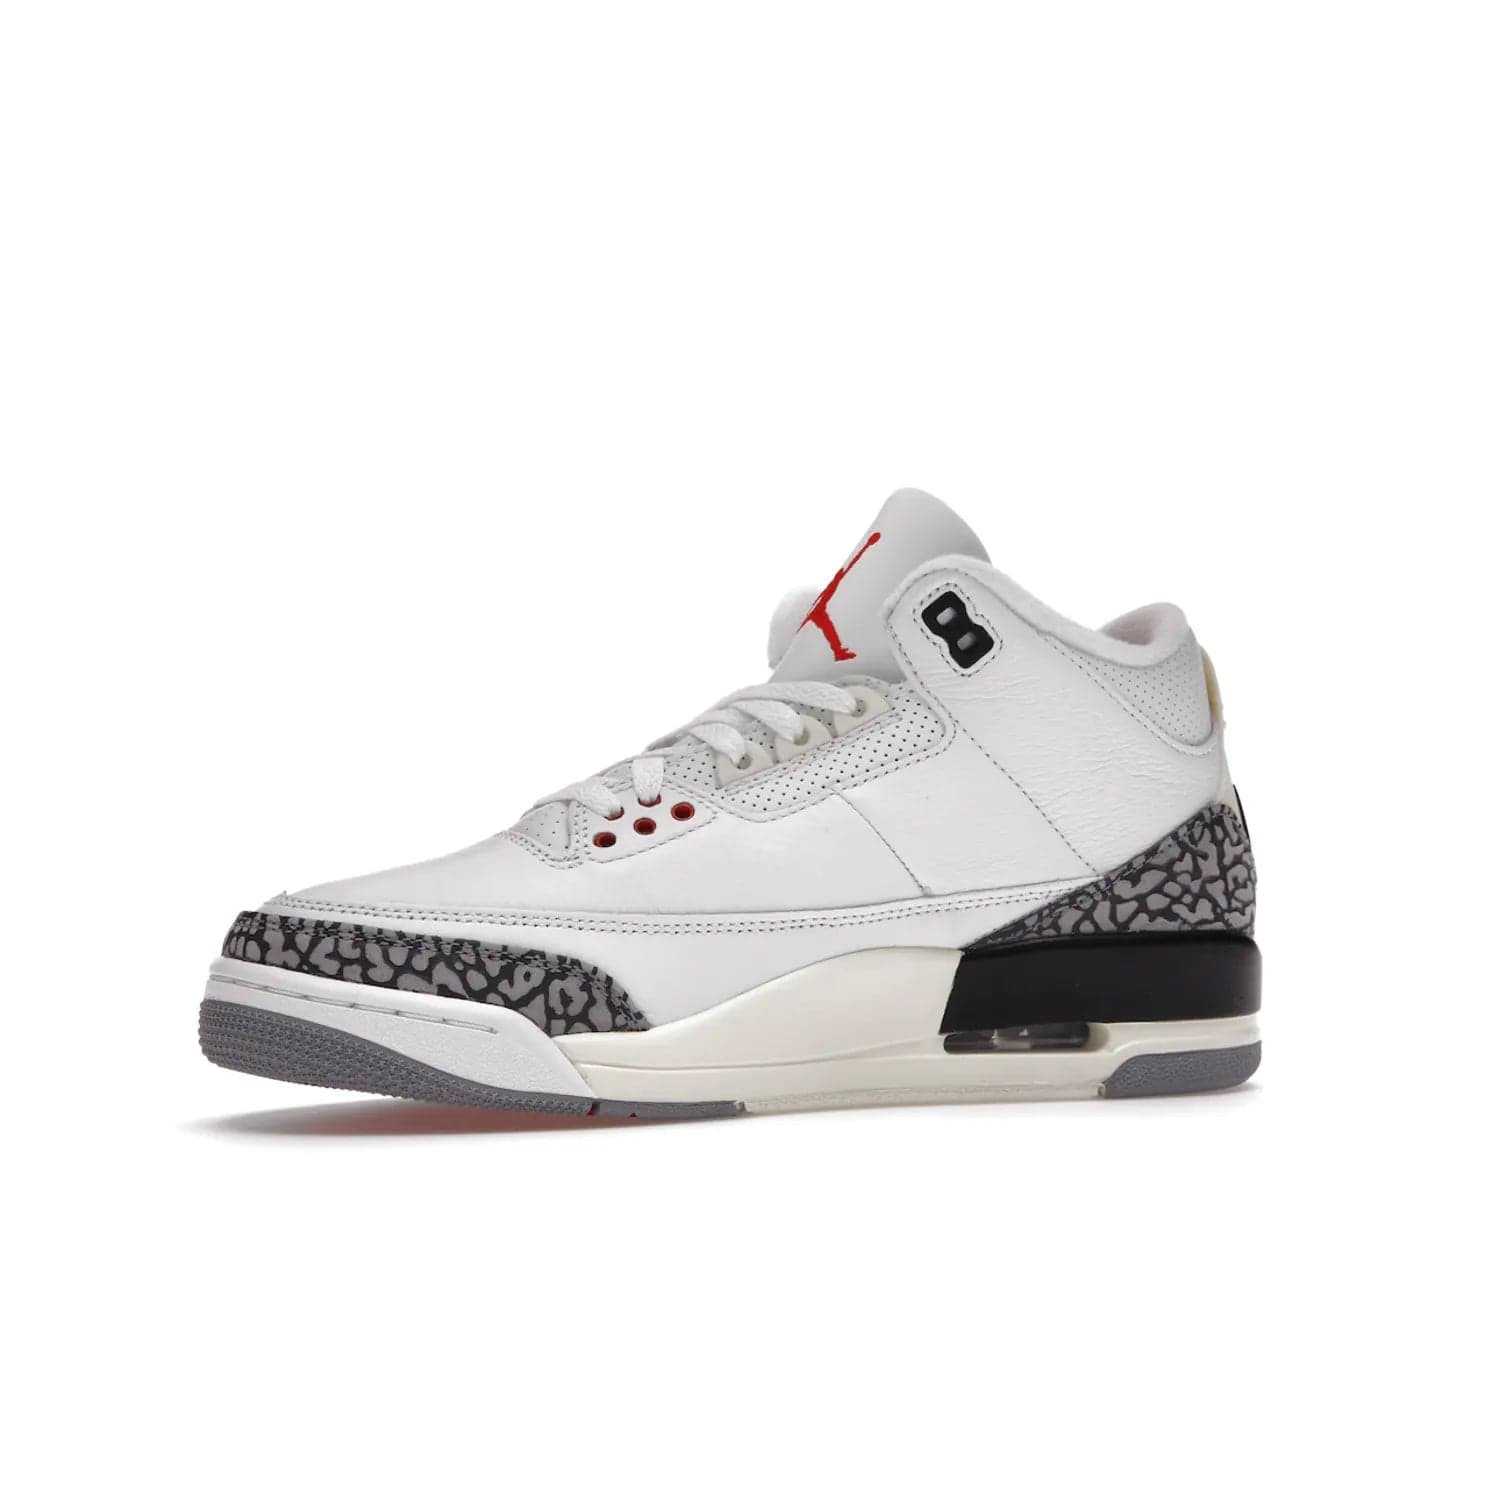 Jordan 3 Retro White Cement Reimagined - Image 17 - Only at www.BallersClubKickz.com - The Reimagined Air Jordan 3 Retro in a Summit White/Fire Red/Black/Cement Grey colorway is launching on March 11, 2023. Featuring a white leather upper, off-white midsoles and heel tabs, this vintage-look sneaker is a must-have.